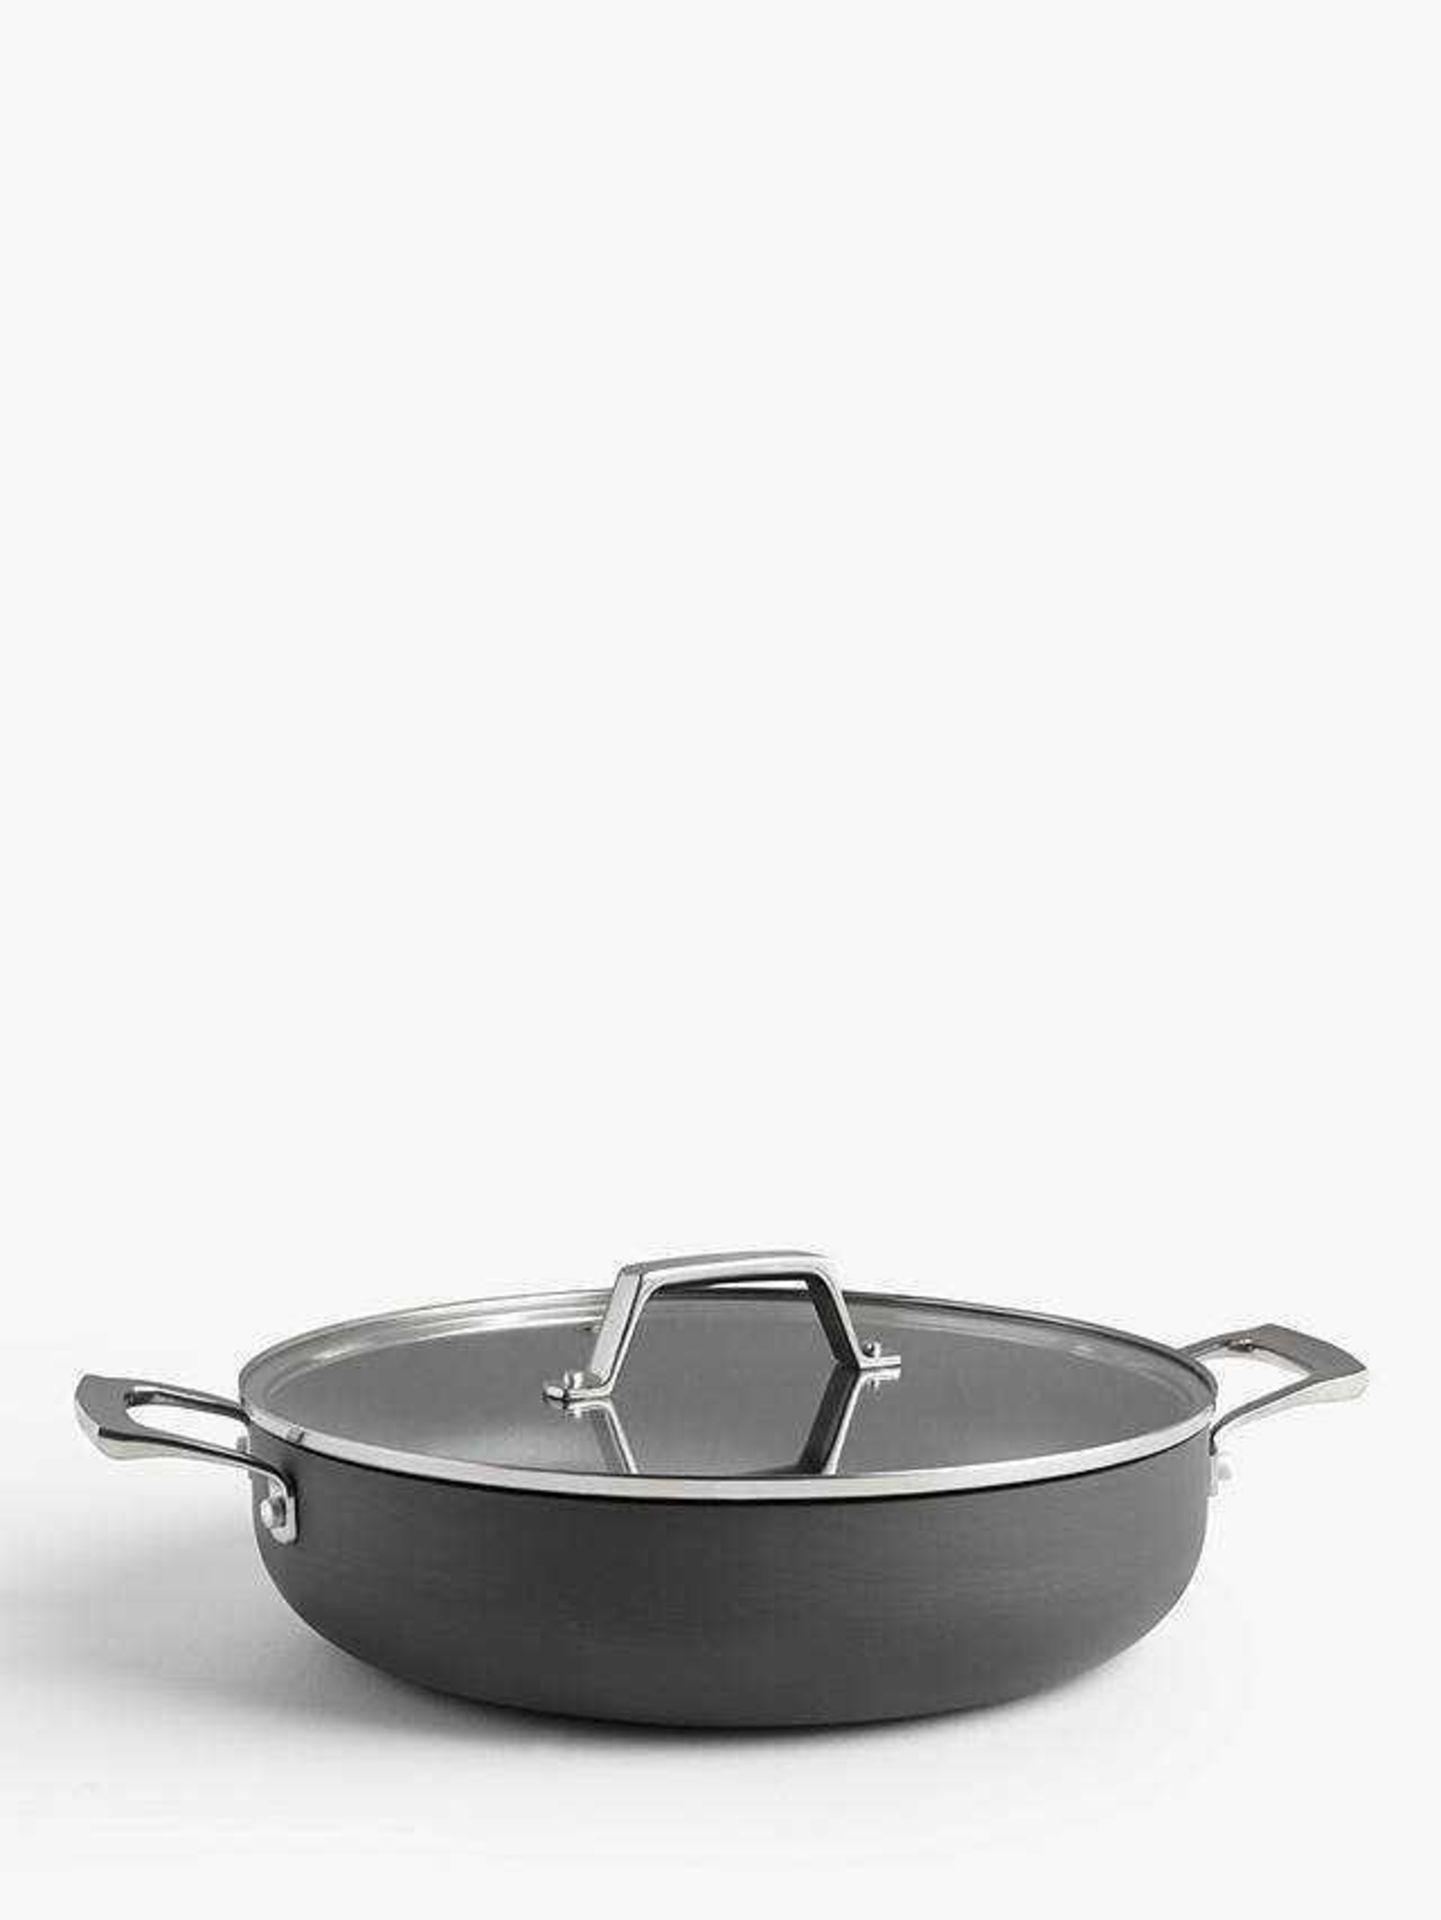 Combined RRP £155 Lot To Contain Two Unbagged John Lewis Non Stick Aluminium 30Cm Saute Pans With Li - Image 2 of 2